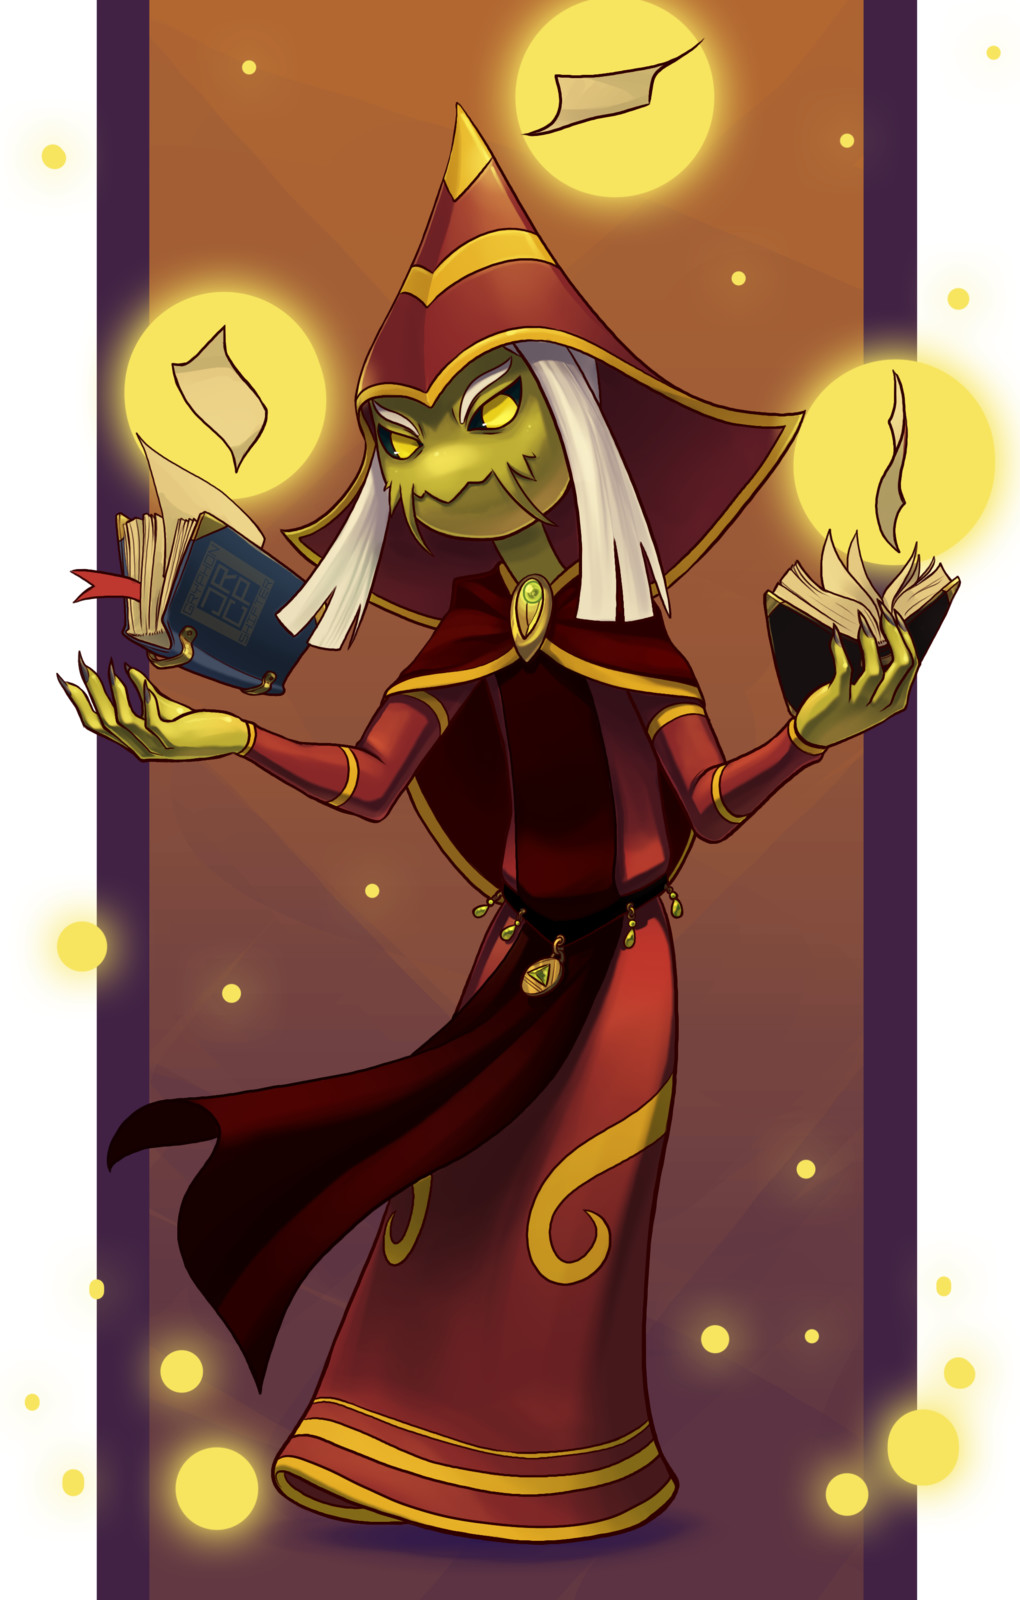 Haxor, an old spellbook-wizard feared by all. They say he’s stayed alive for a thousand years by stealing the souls of those who approach his tower.